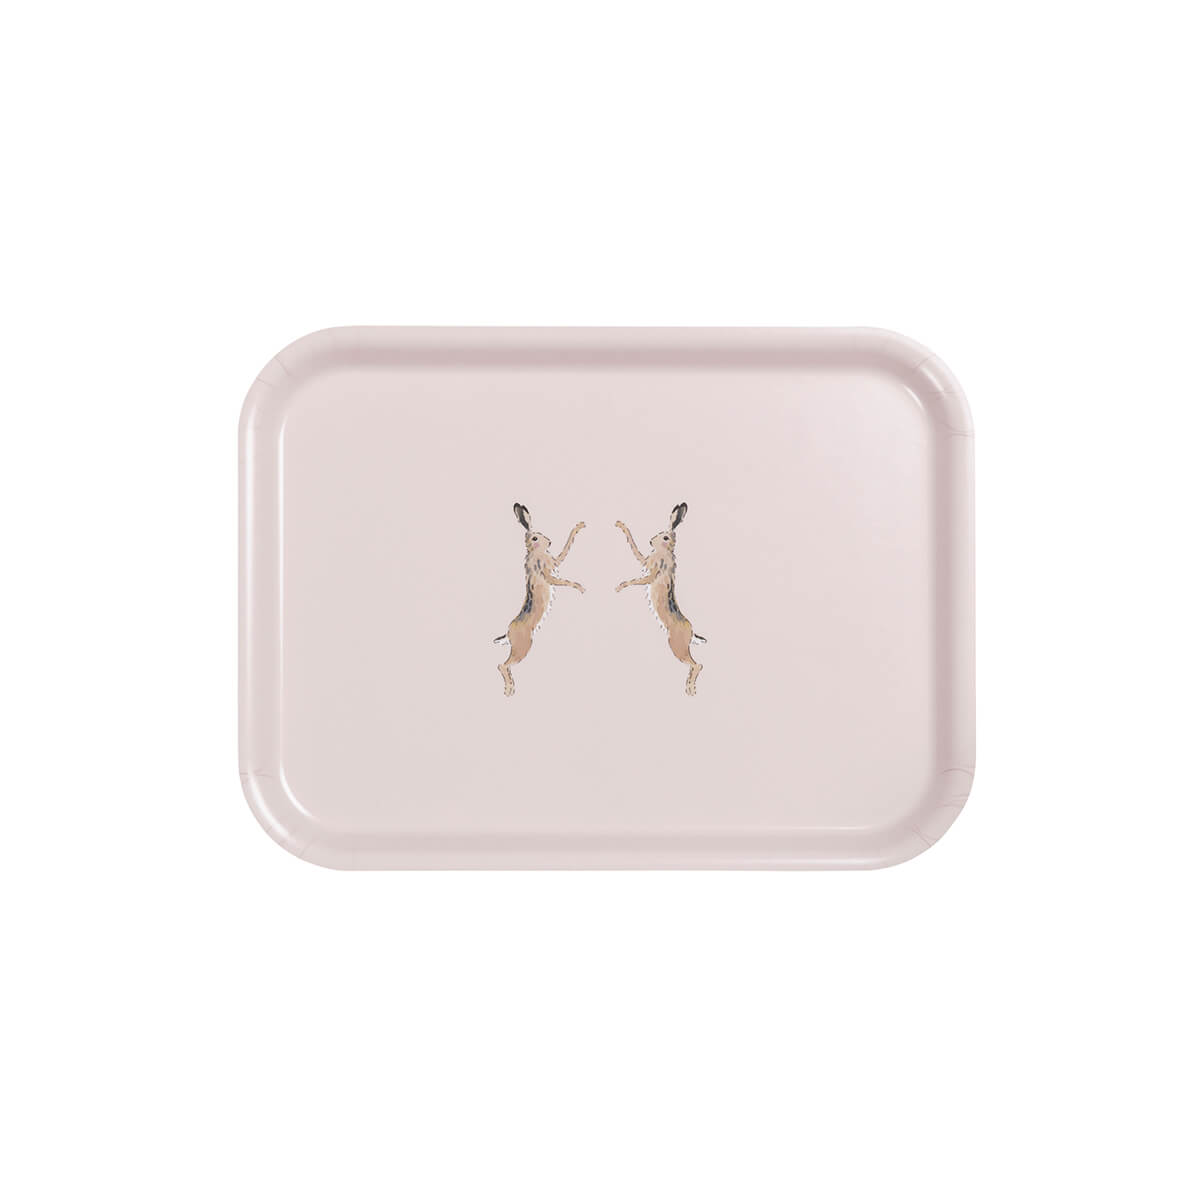 light pink handmade tray from Sophie Allport feature two boxing hare illustrations